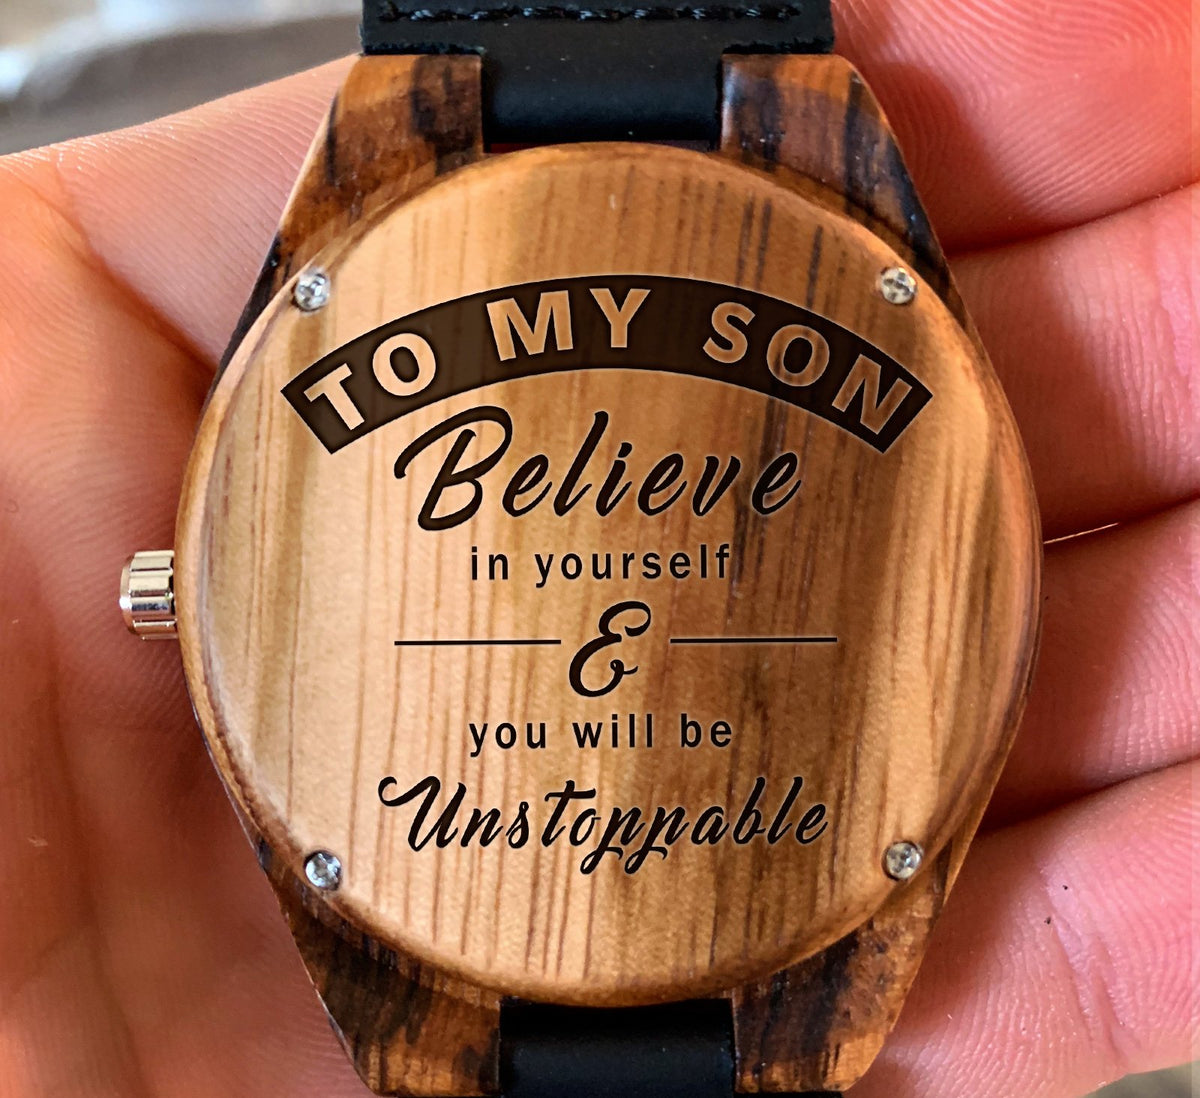 To My Son - Believe in Yourself &amp; You Will Be Unstoppable - Wooden Watch